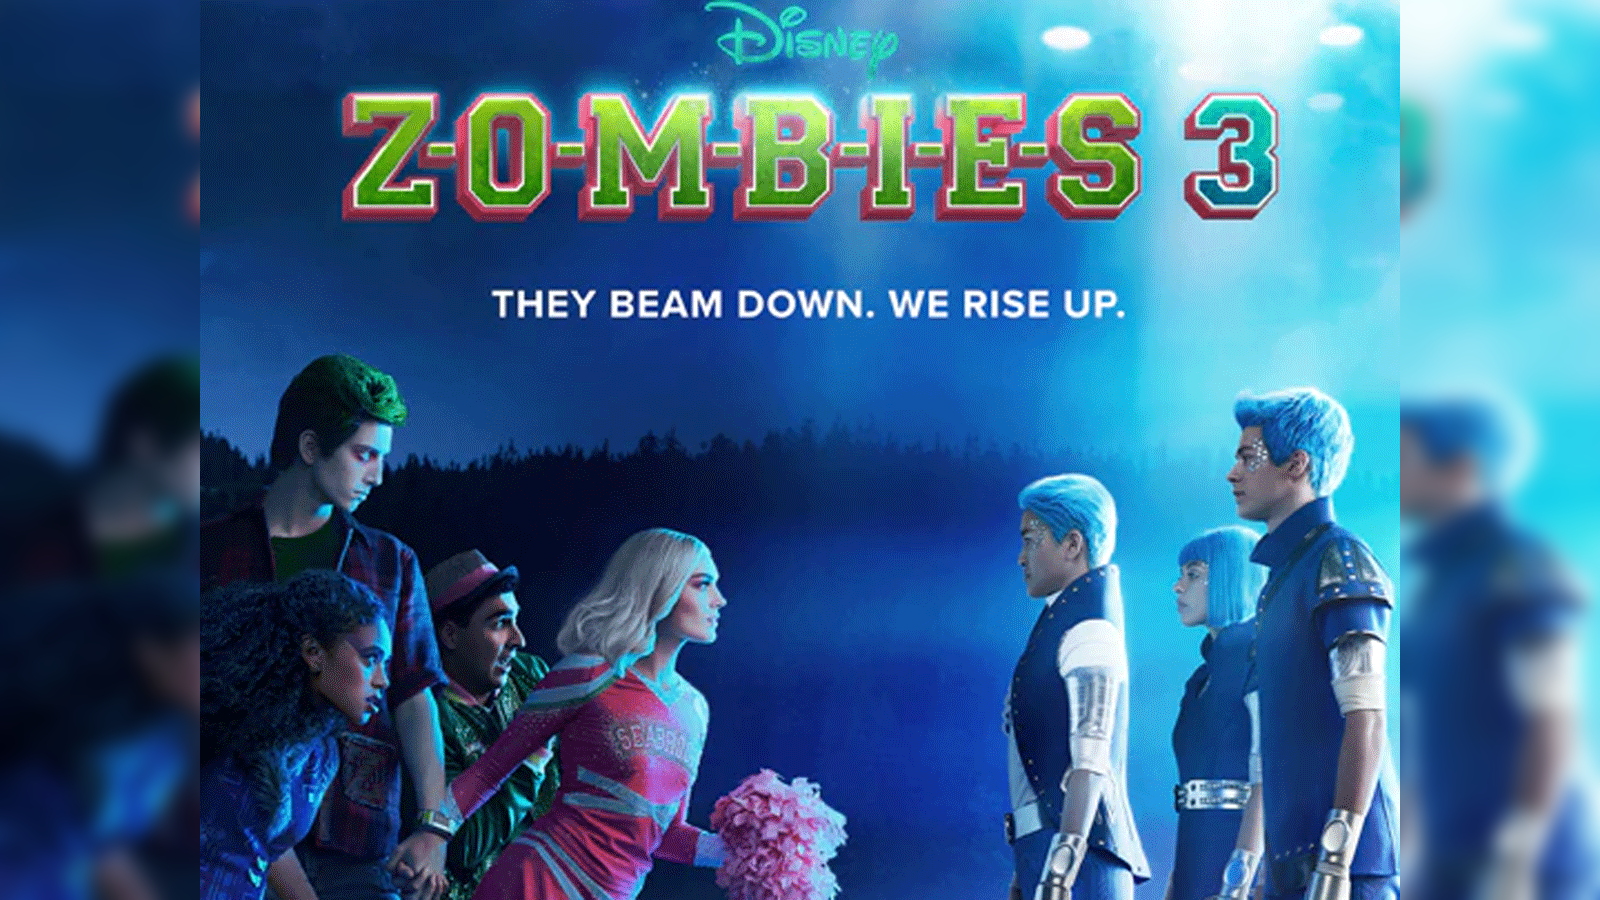 Disney Zombies 3 movie: pictures, posters, photos, art, clips and